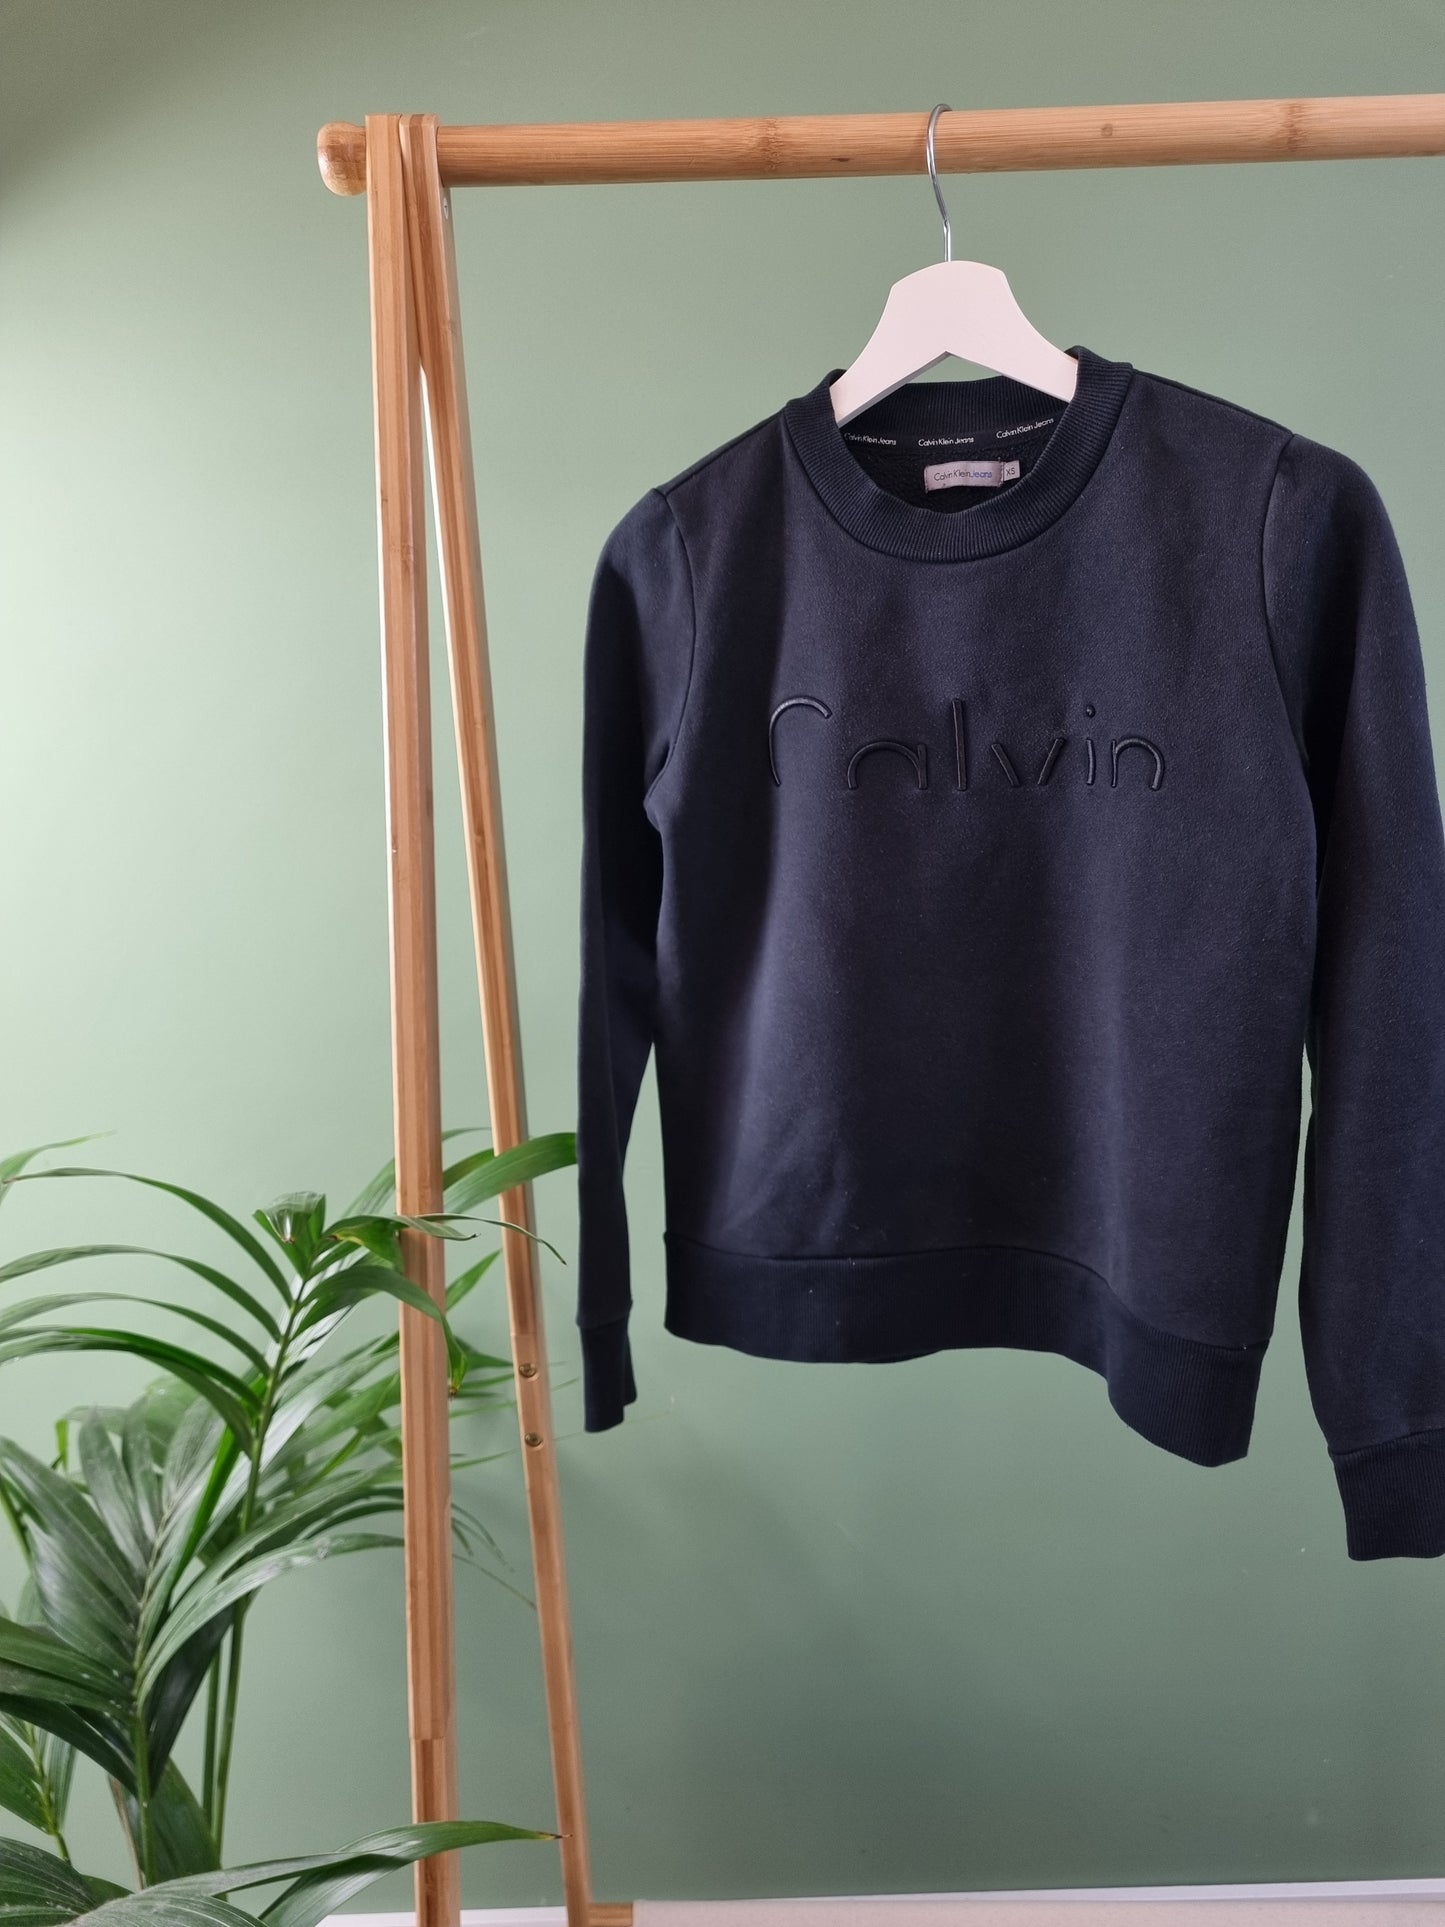 Calvin Klein embroidered text sweater maat XS